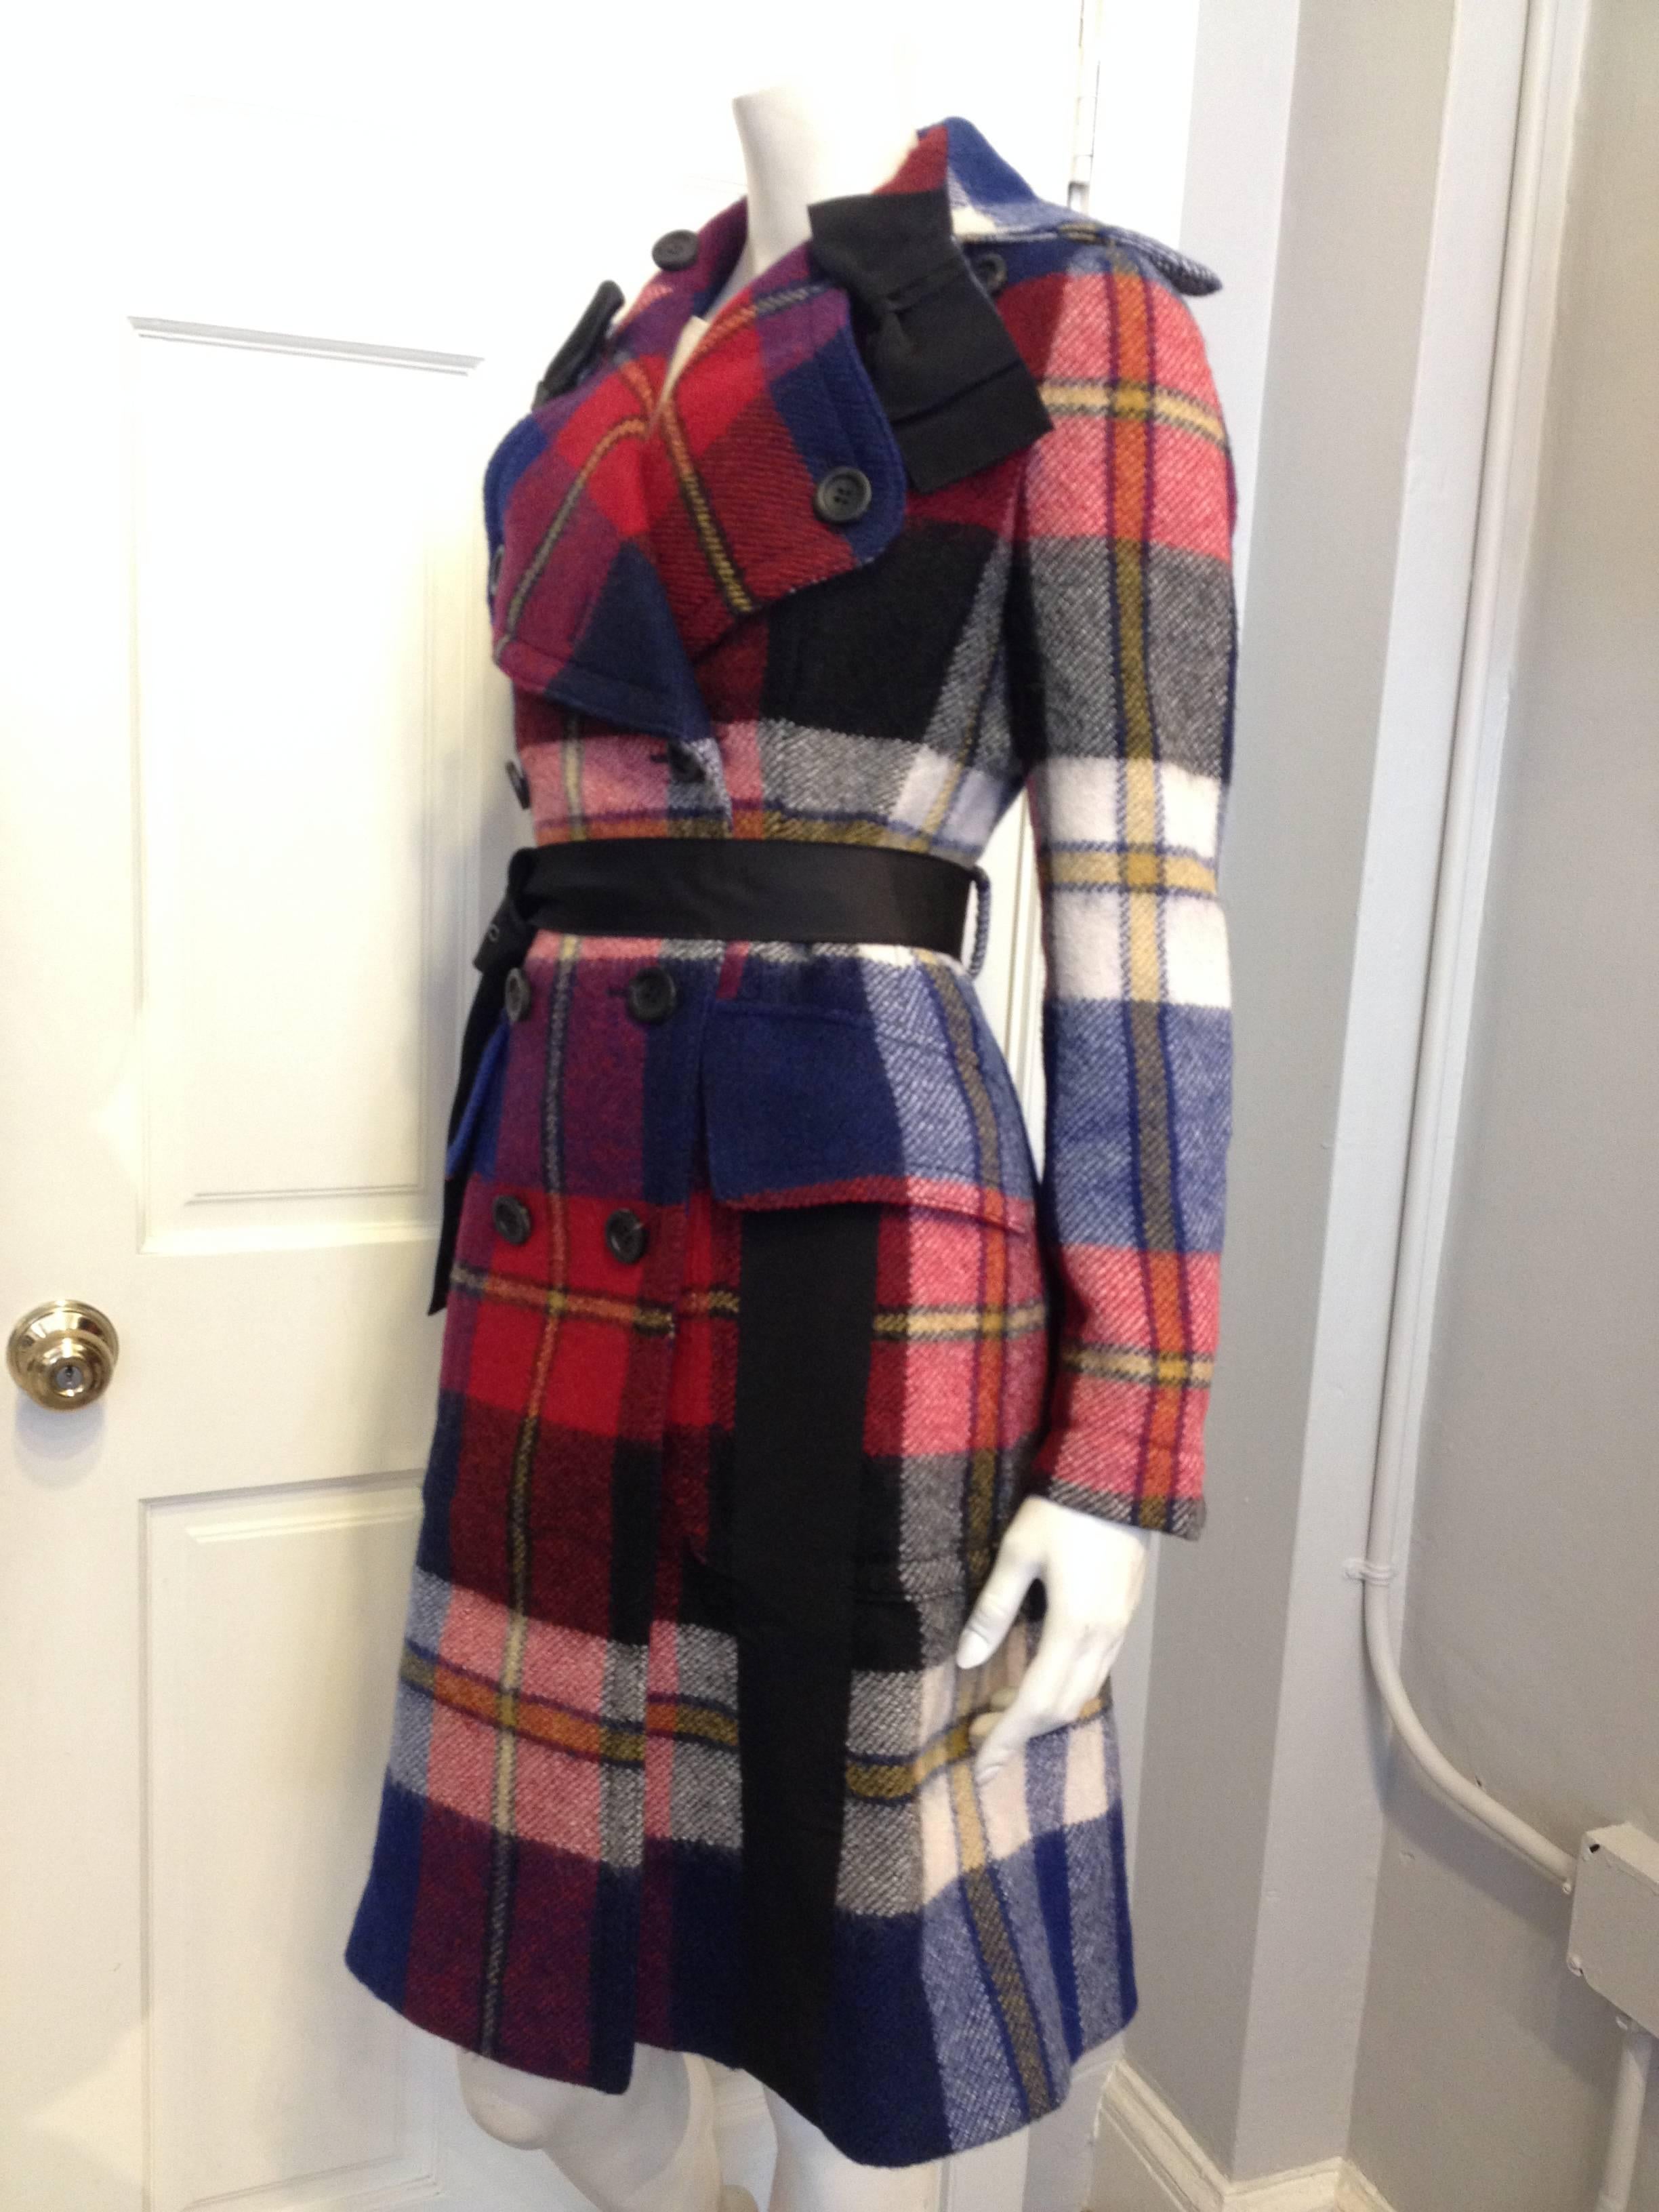 Both chic and ruggedly practical, this coat by Prada takes utilitarian lumberjack wool plaid and dresses it up with big grosgrain ribbon bows. The silhouette is a classic and feminine double breasted pea coat shape, with oversized lapels and pockets